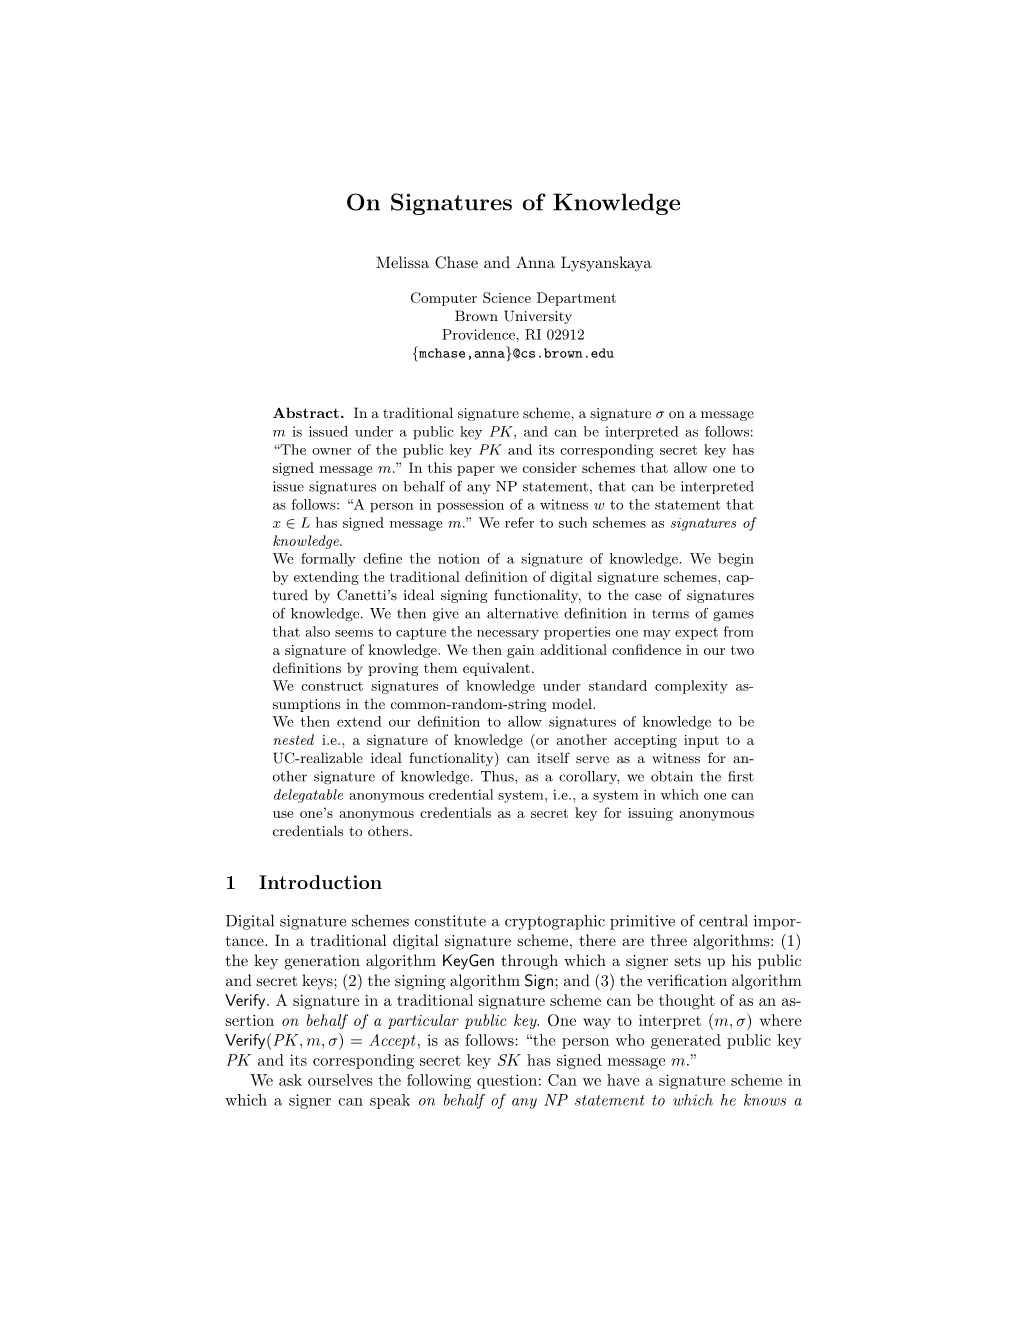 On Signatures of Knowledge